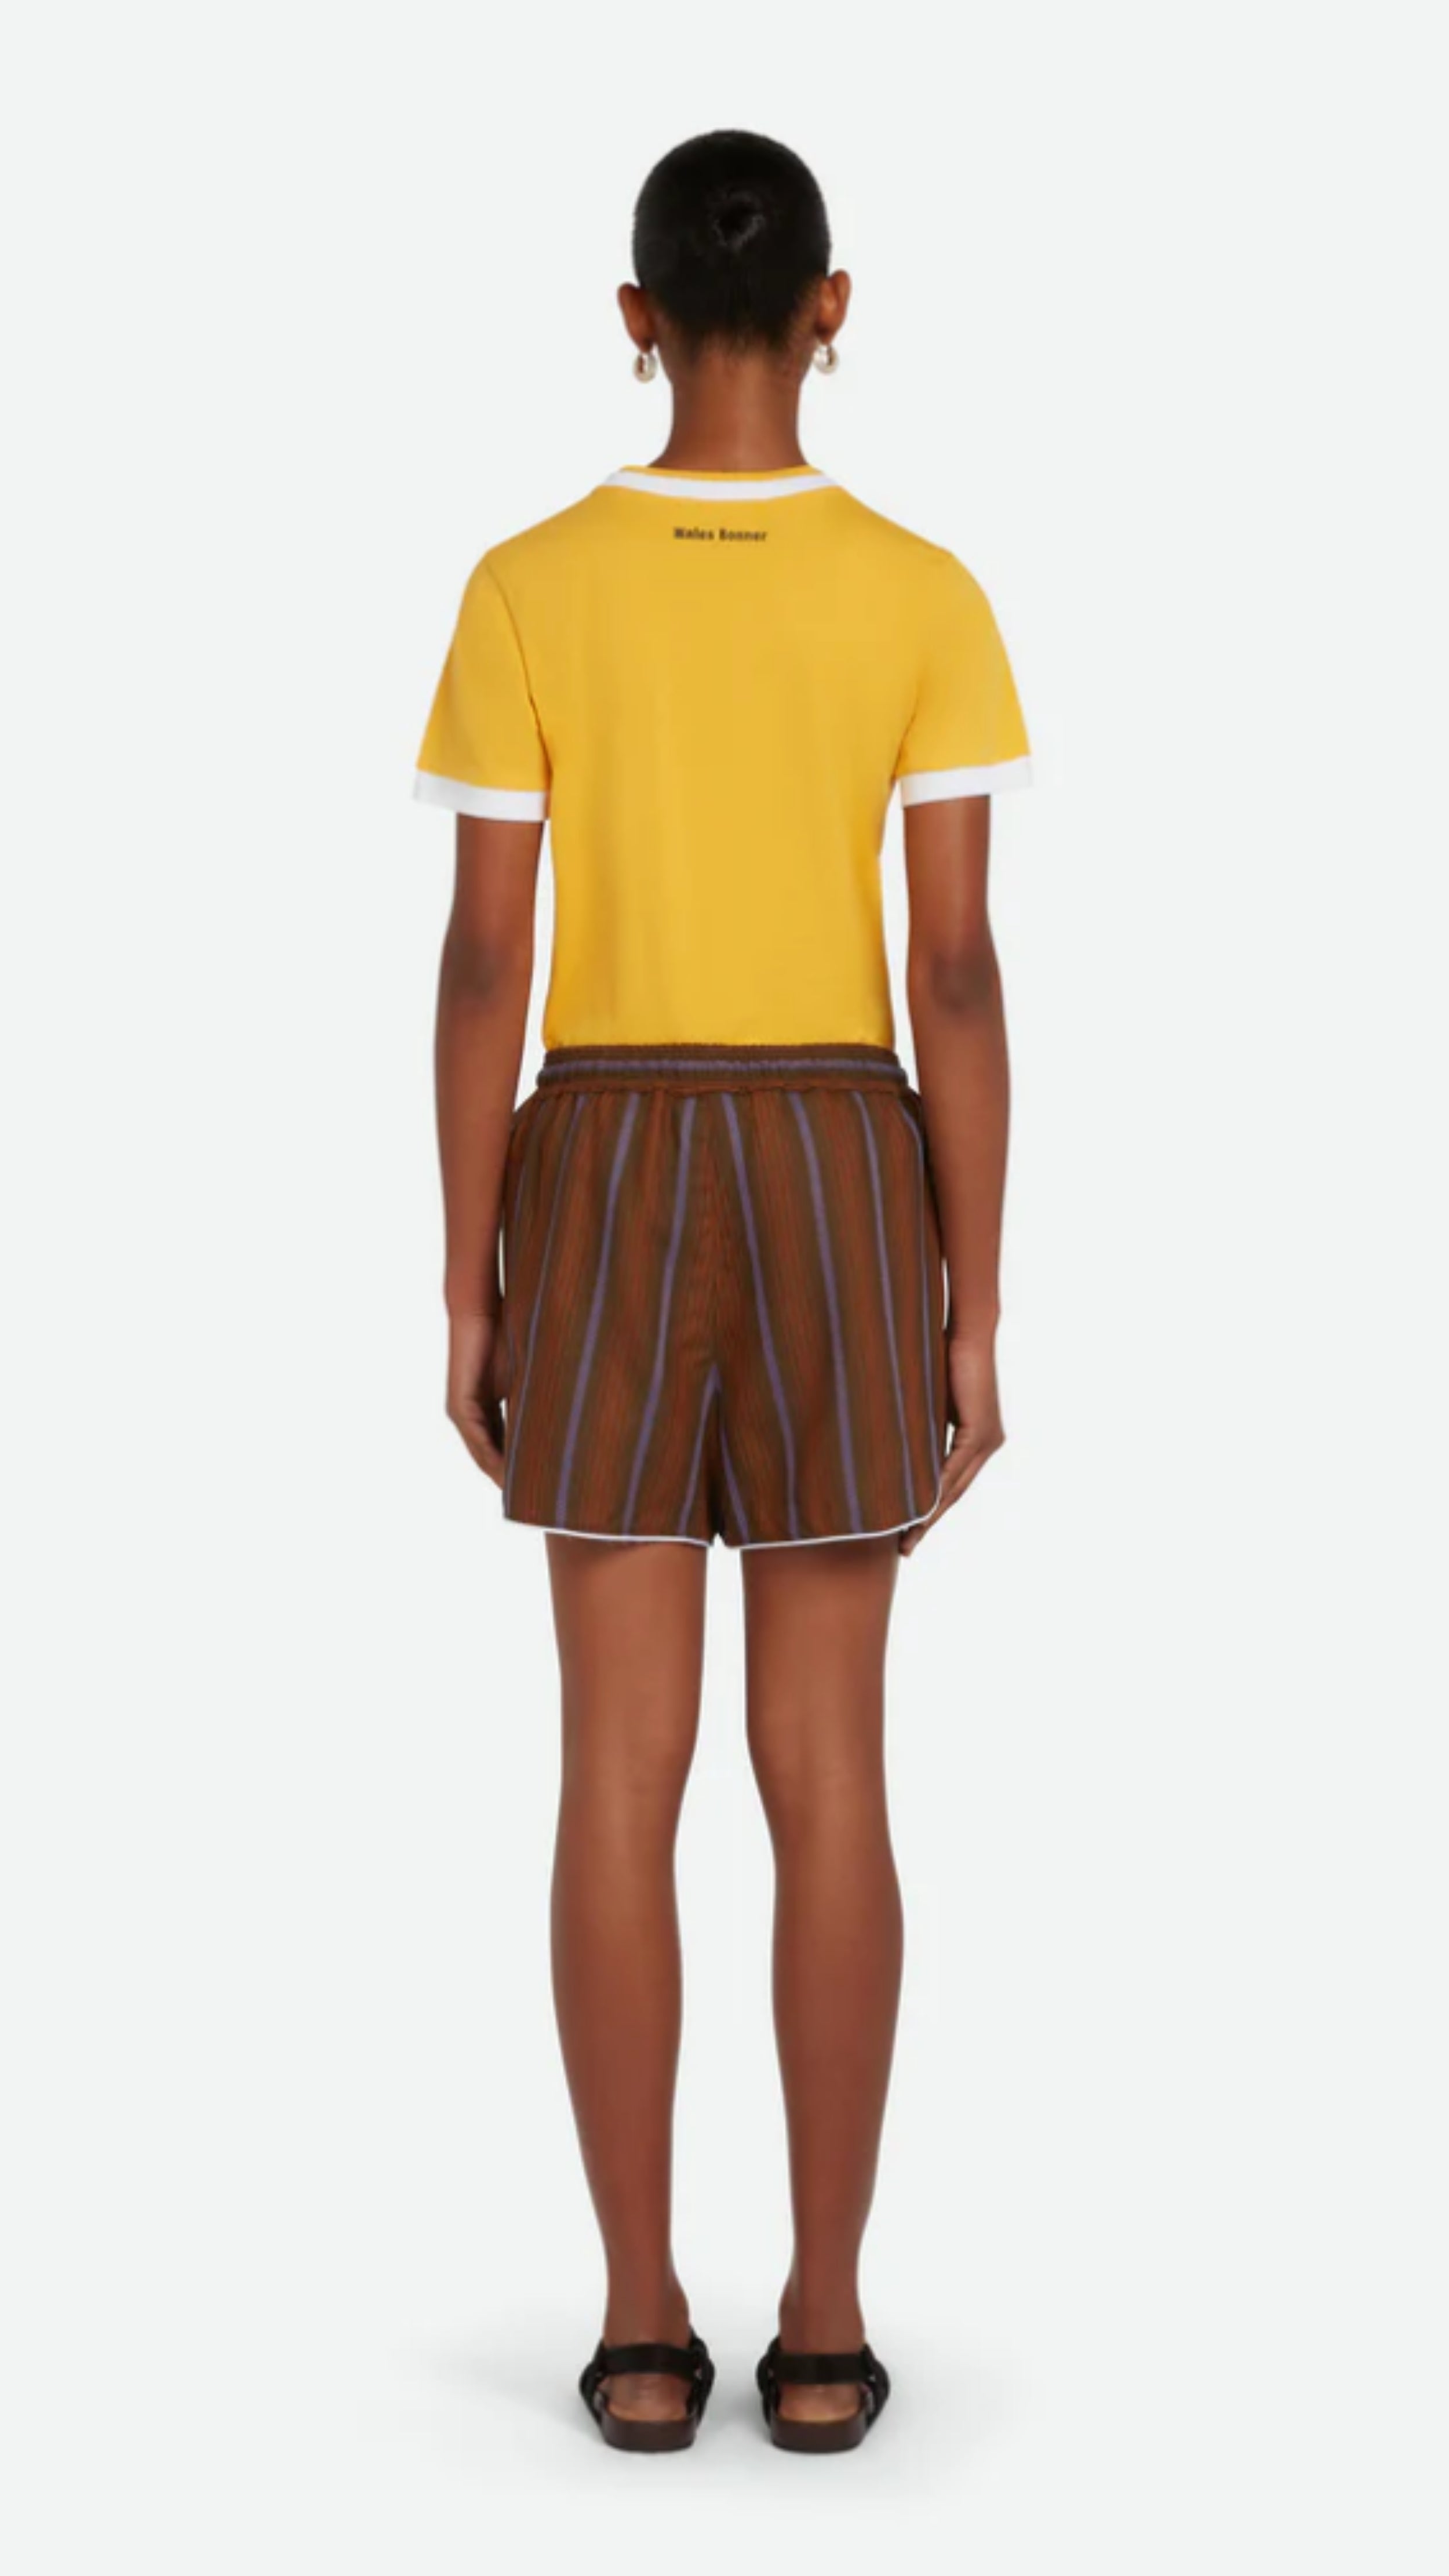 Wales Bonner The Life Shorts are made from Italian-made, lightweight herringbone summer wool fabric in deep brown and blue stripes. Classic atheltic shape these shorts have an elastic waistband, a draw string and contrasting white trim at the leg. Shown on model facing back.